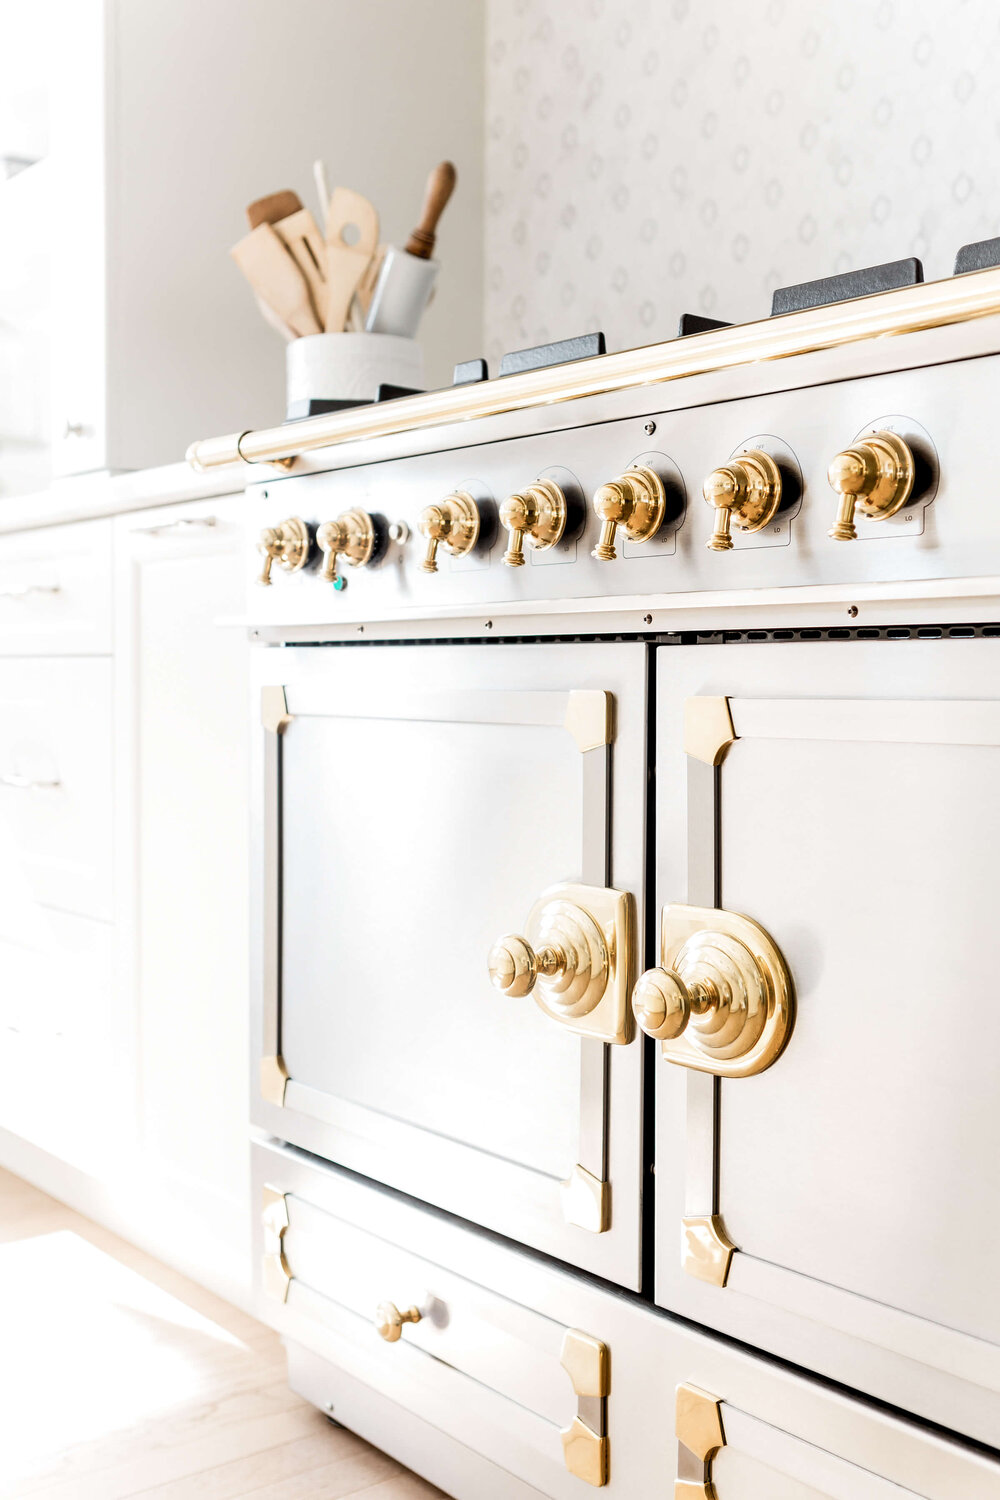 Designer Dining The Essentials Of French Provincial Kitchens